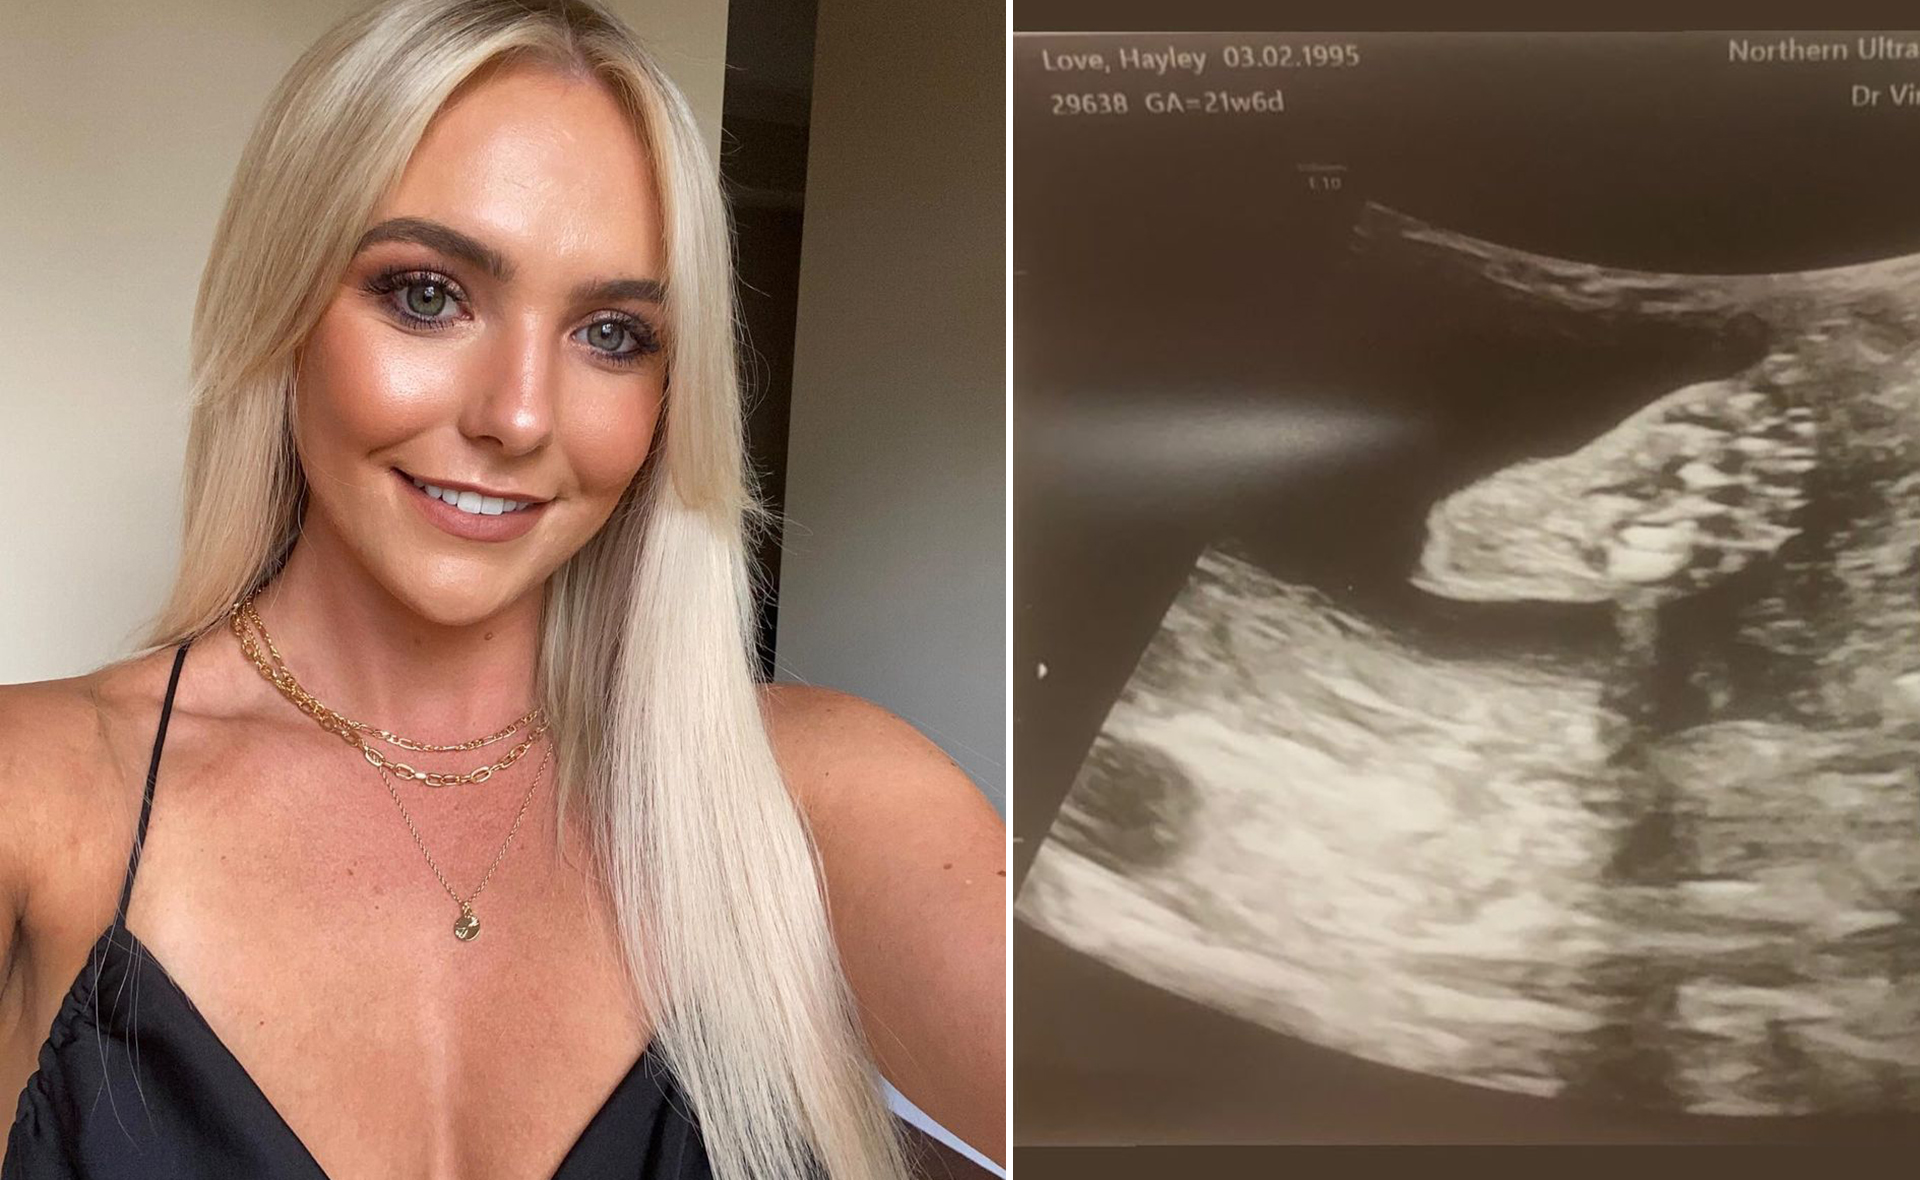 Farmer Wants A Baby! Hayley reveals that she is pregnant with Farmer Will’s child